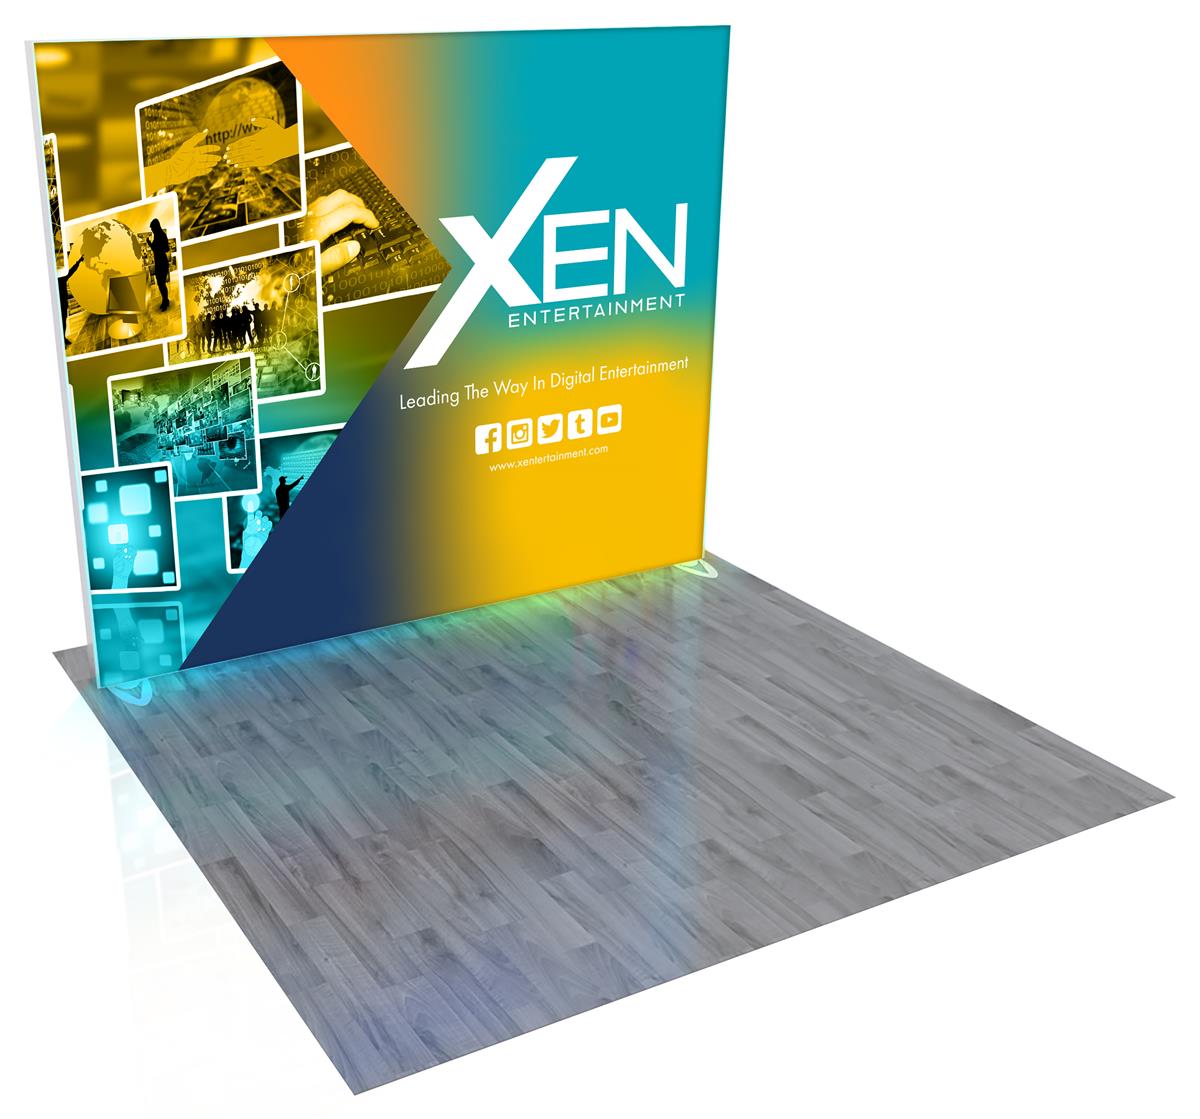 Trade show exhibit LED lightbox rental with full color custom graphics